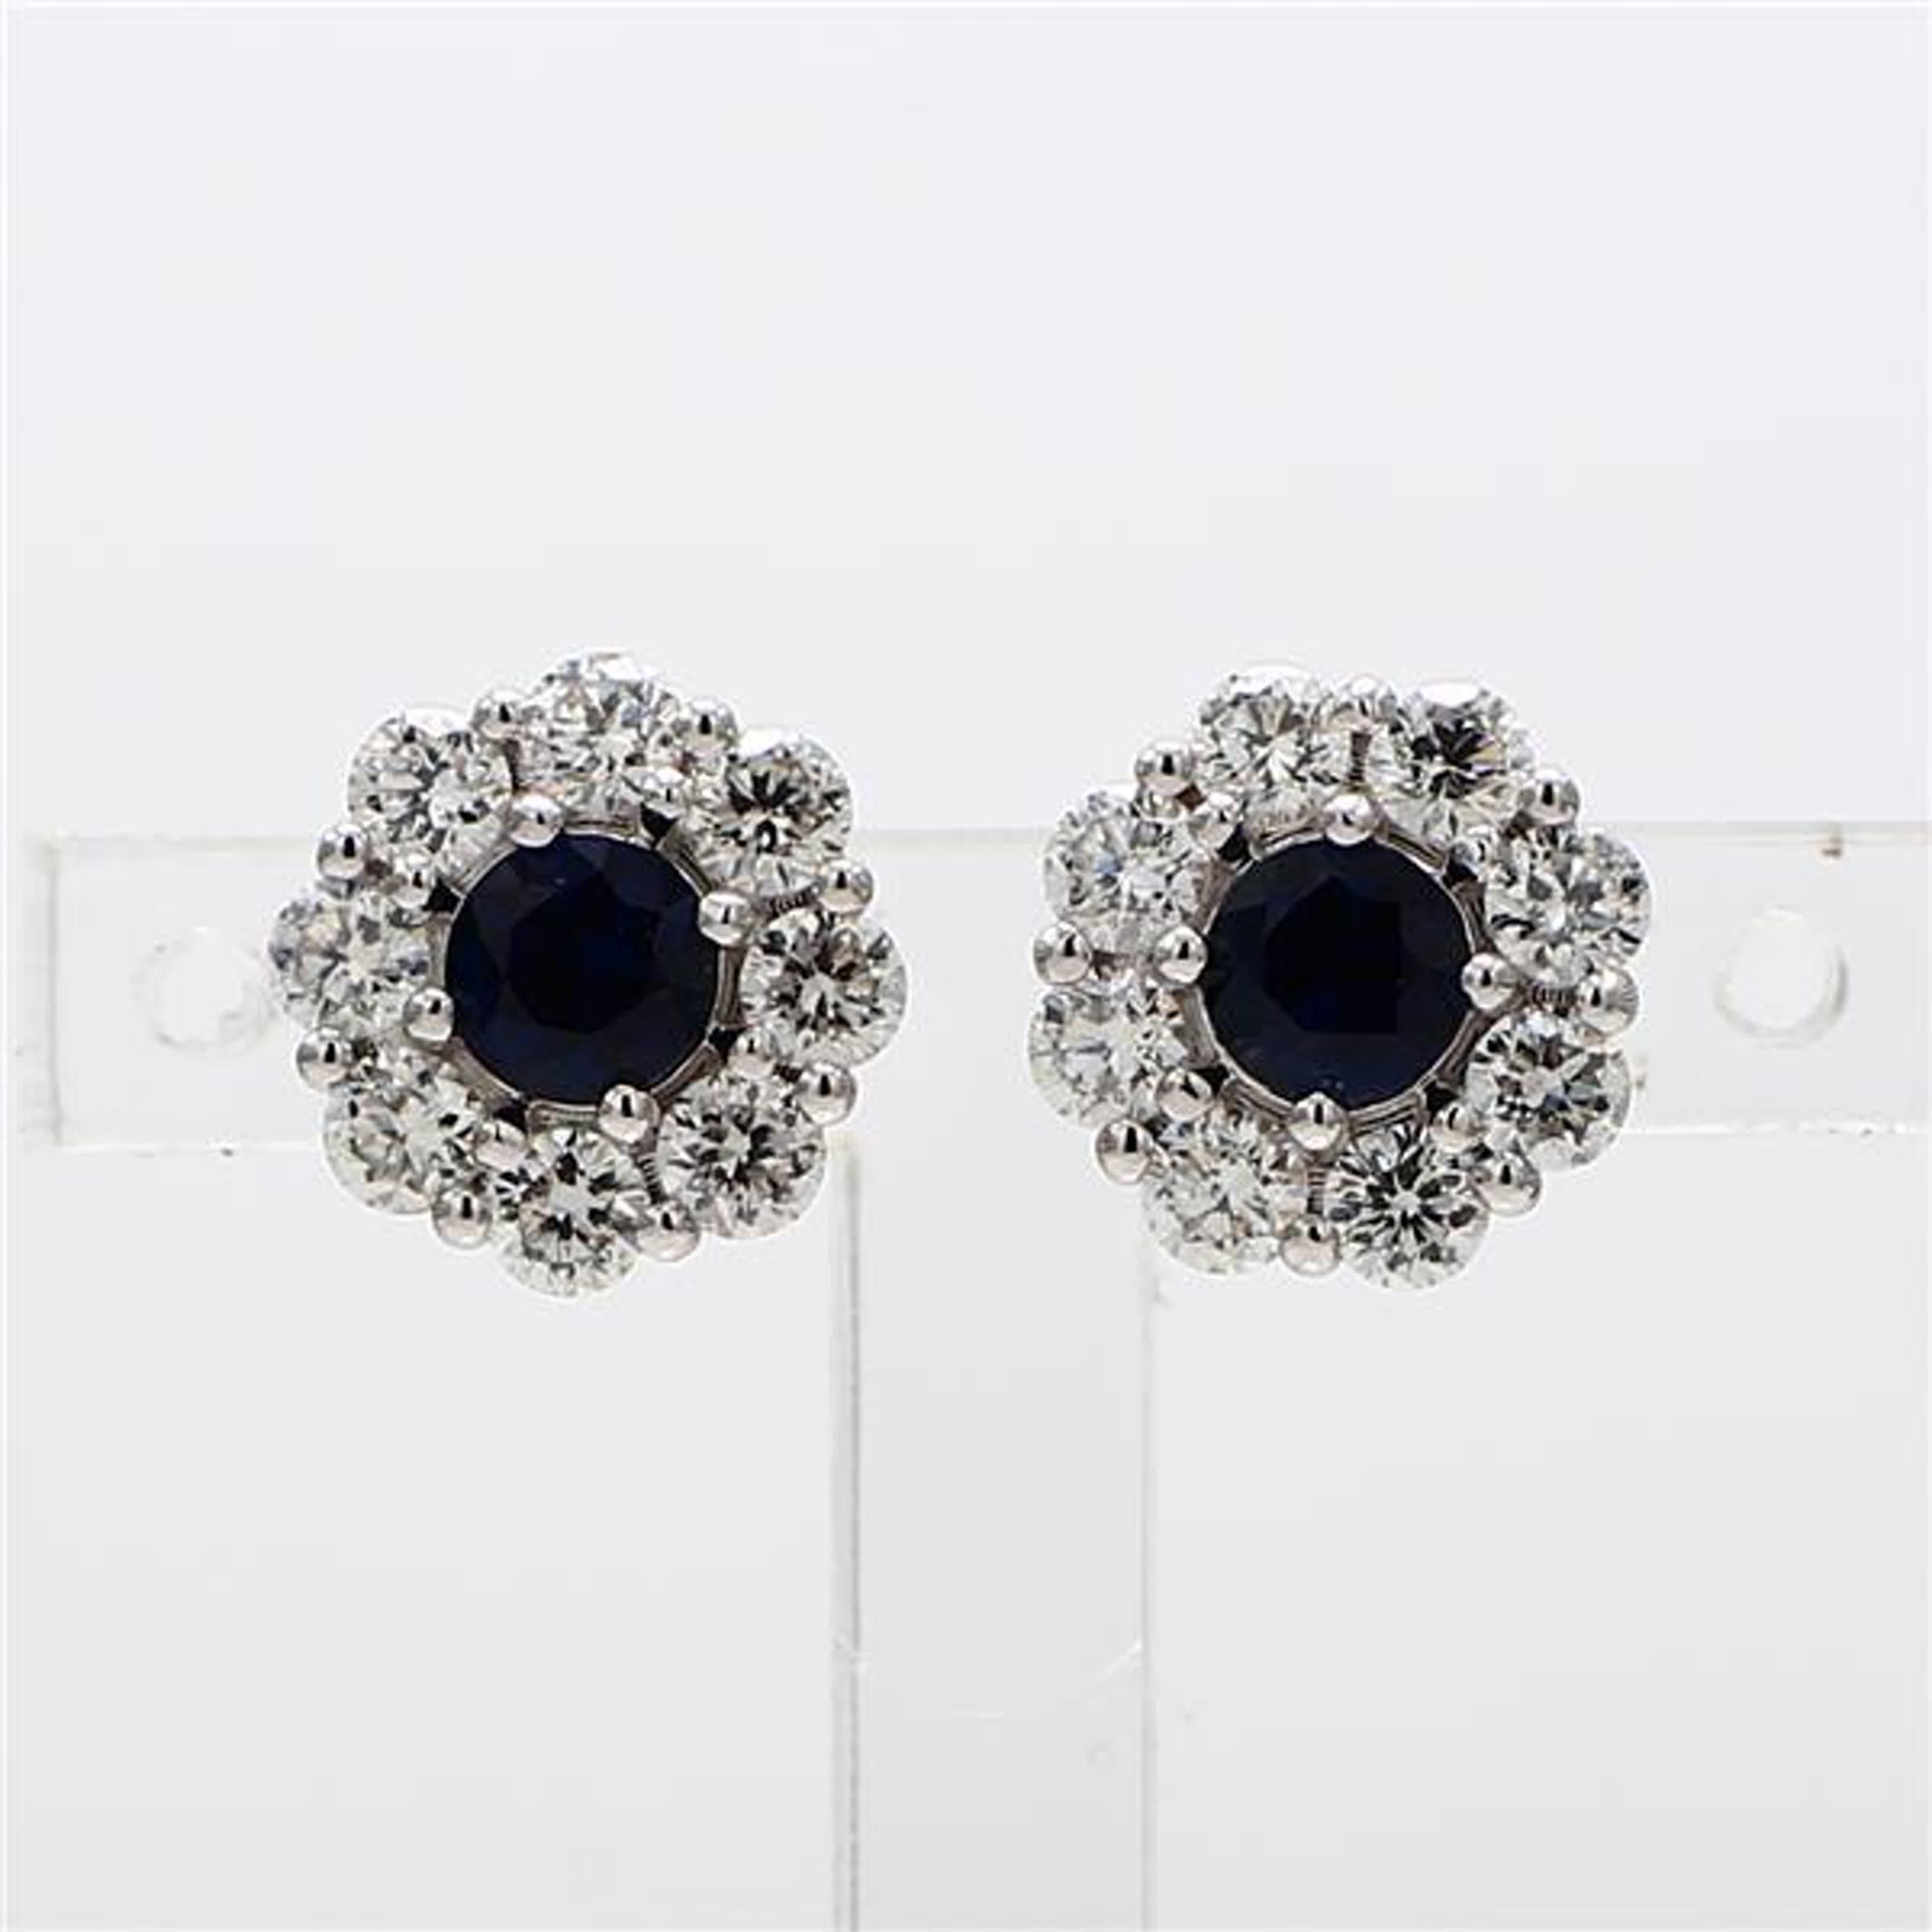 RareGemWorld's classic sapphire earrings. Mounted in a beautiful 14K White Gold setting with natural round cut blue sapphires. The sapphires are surrounded by natural round white diamond melee in a beautiful single halo. These earrings are